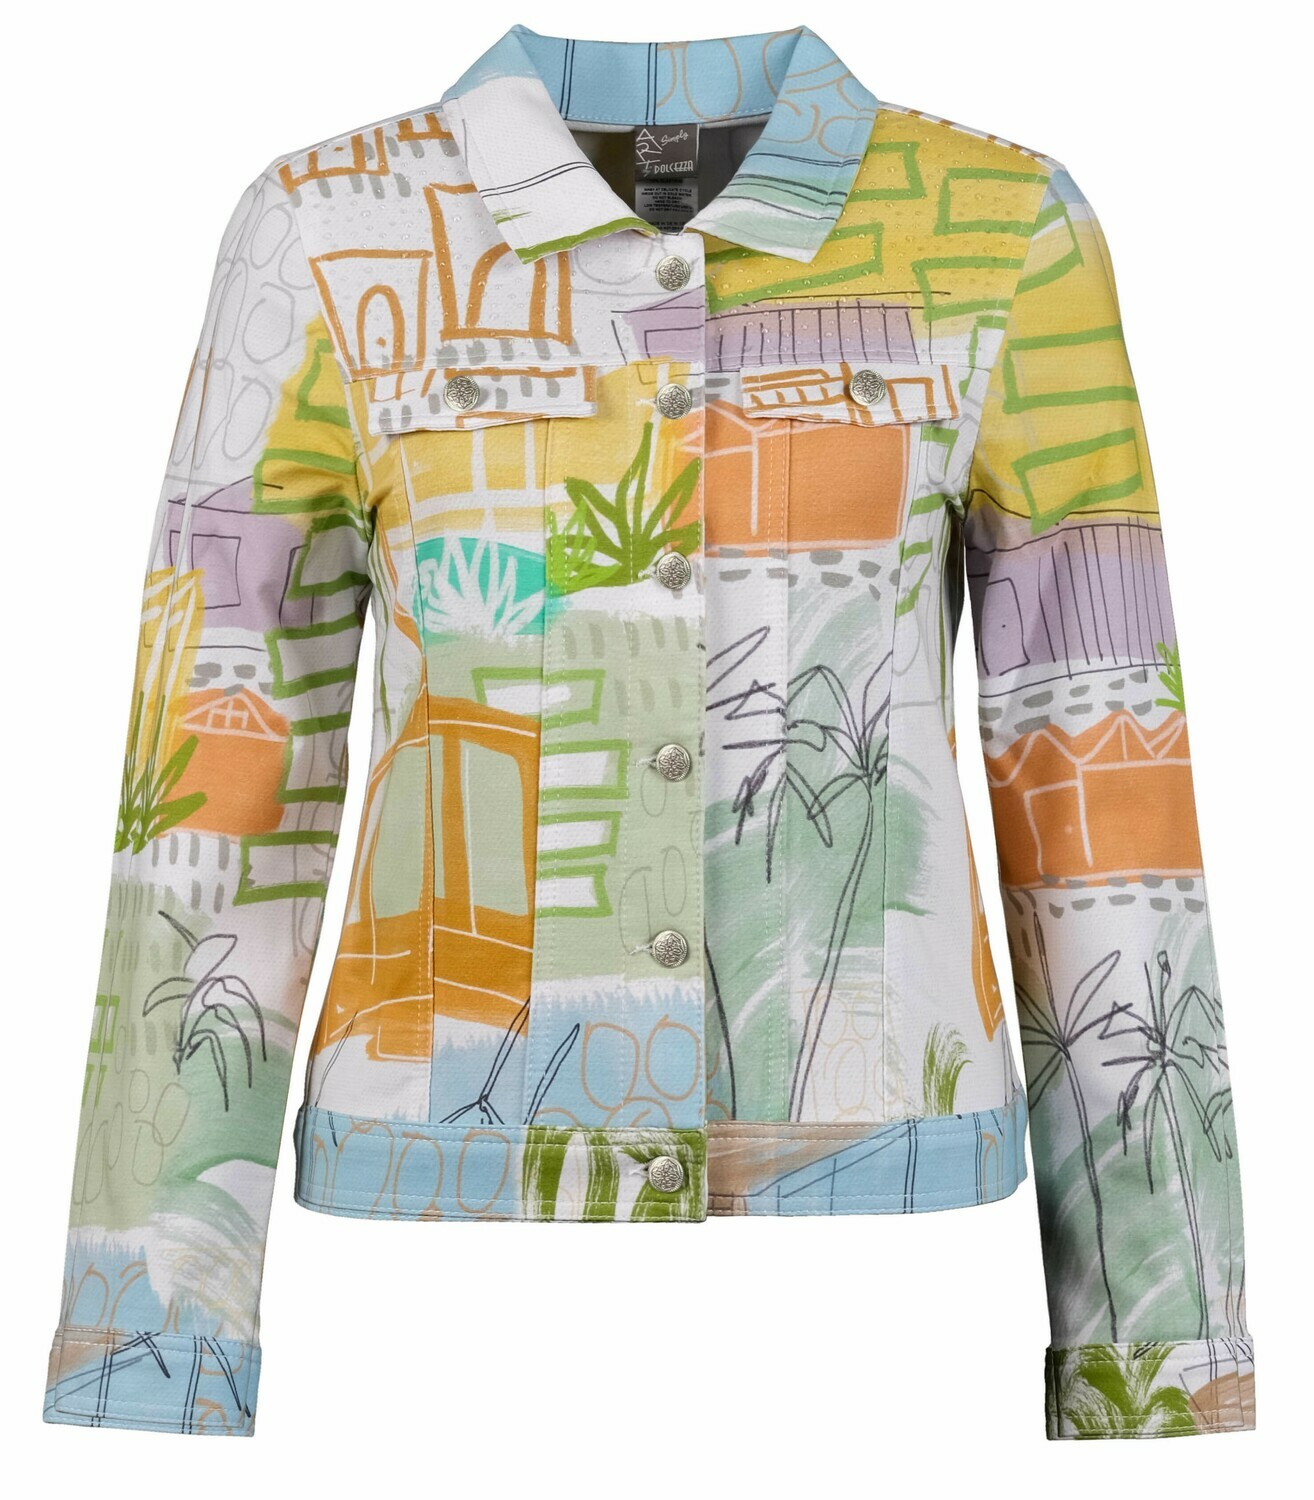 Simply Art Dolcezza: Palm Springs Cityscape Abstract Art Denim Jacket